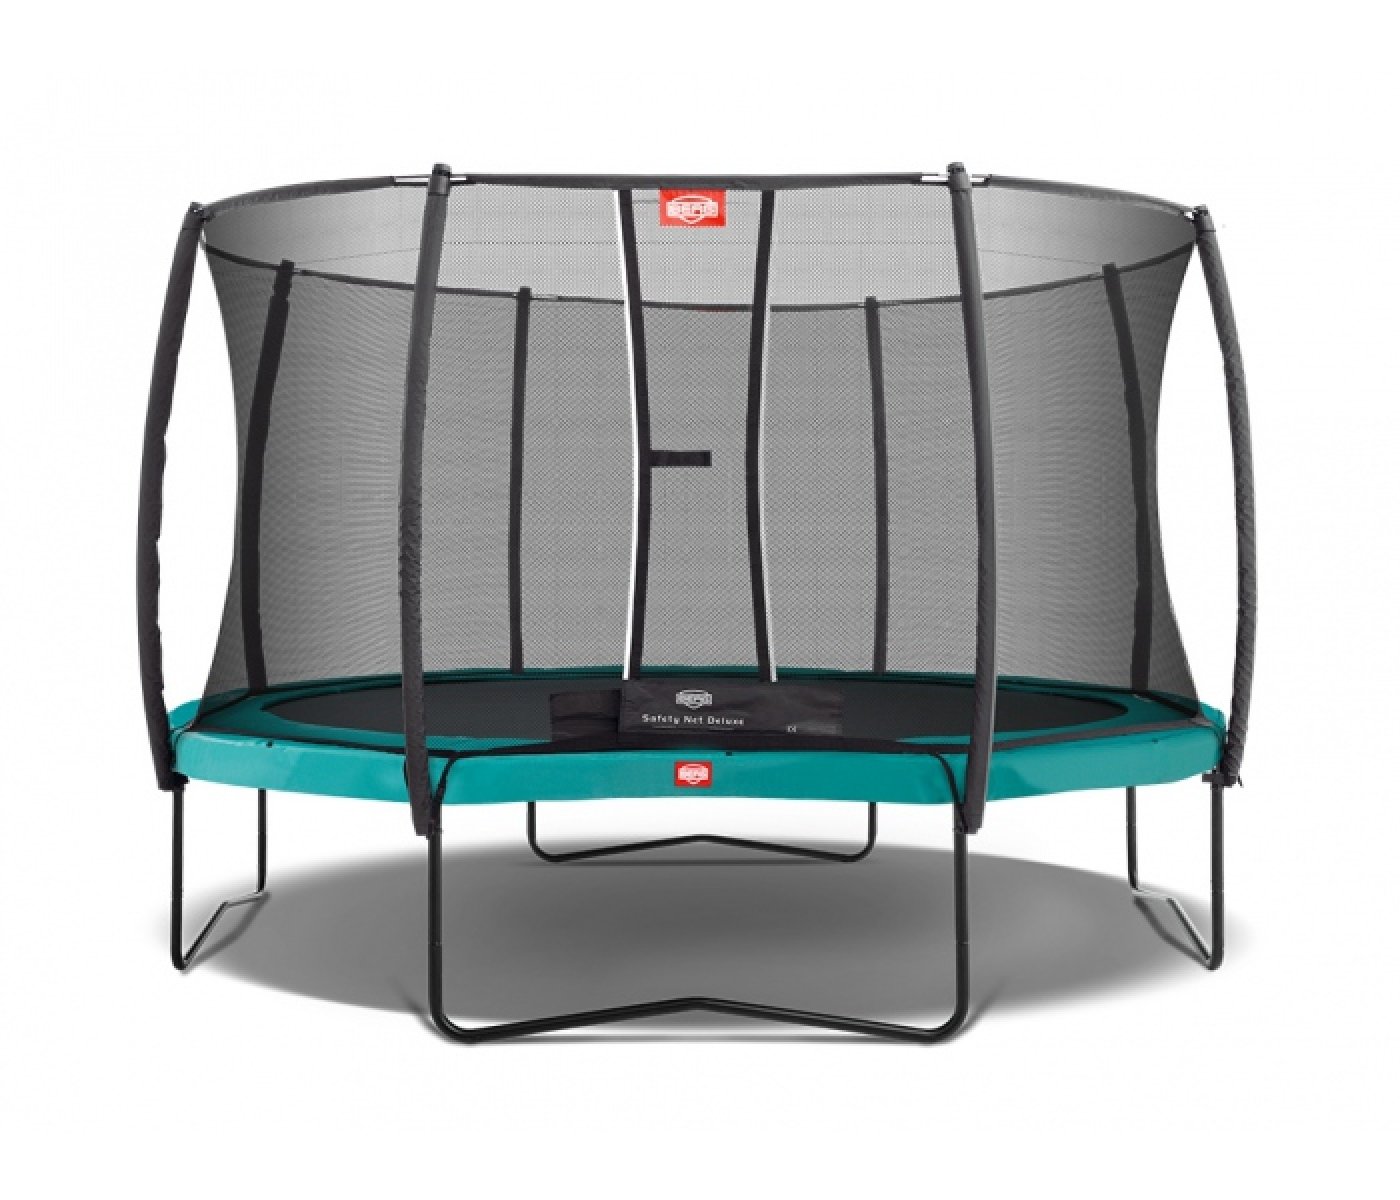 BERG - Trampoline Champion 330 Airflow with Deluxe Safety net and ladder - Leker